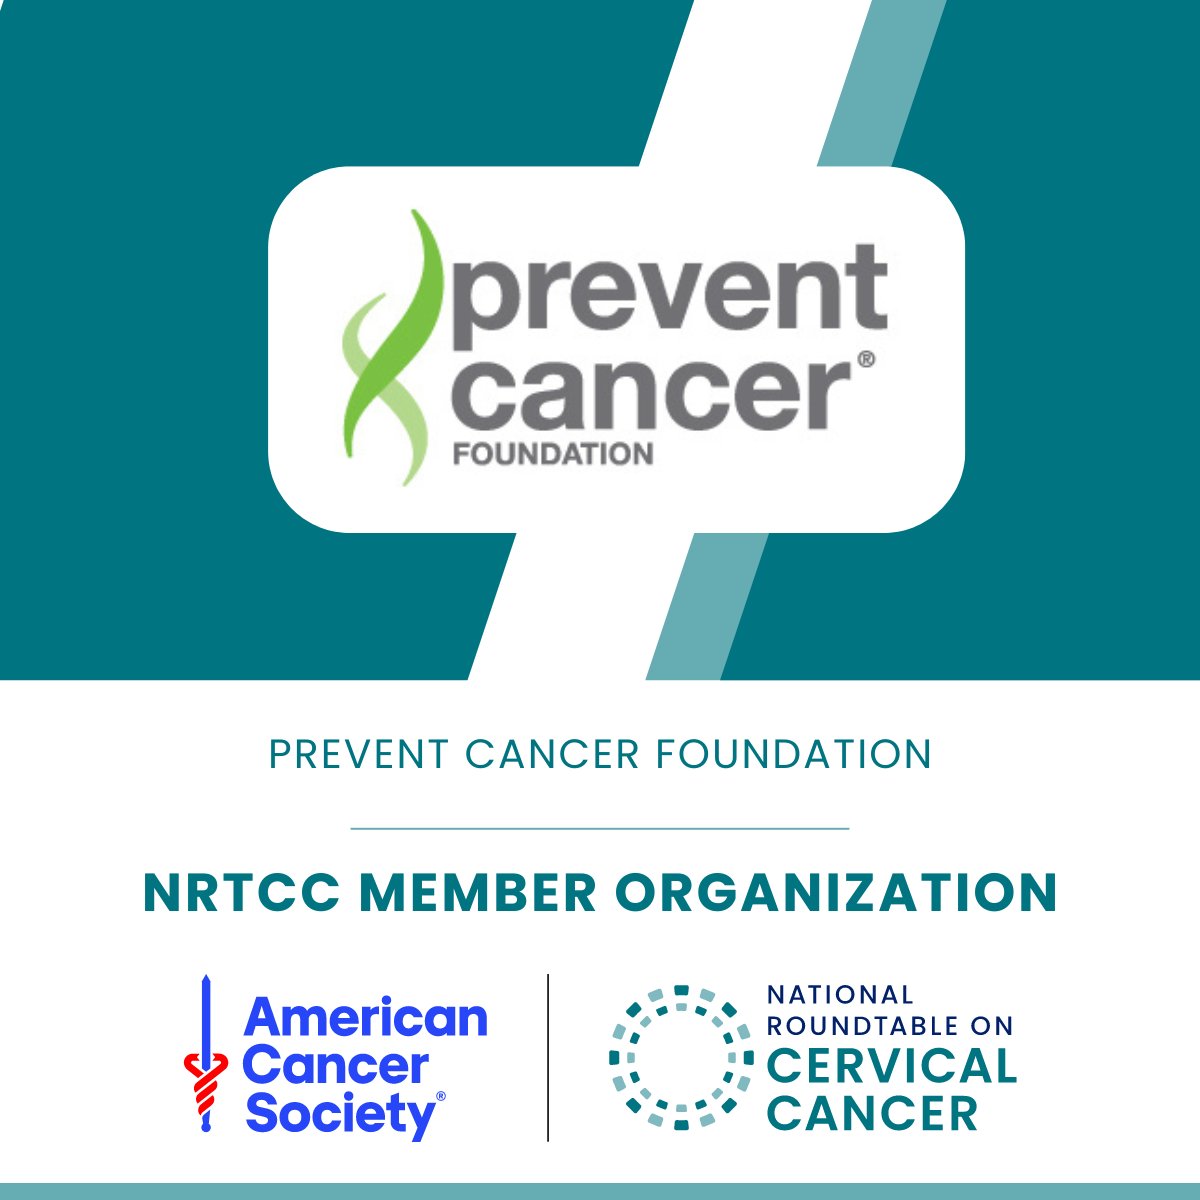 Welcome aboard, @preventcancer! Prevent Cancer Foundation is empowering people to stay ahead of cancer through prevention and early detection. preventcancer.org